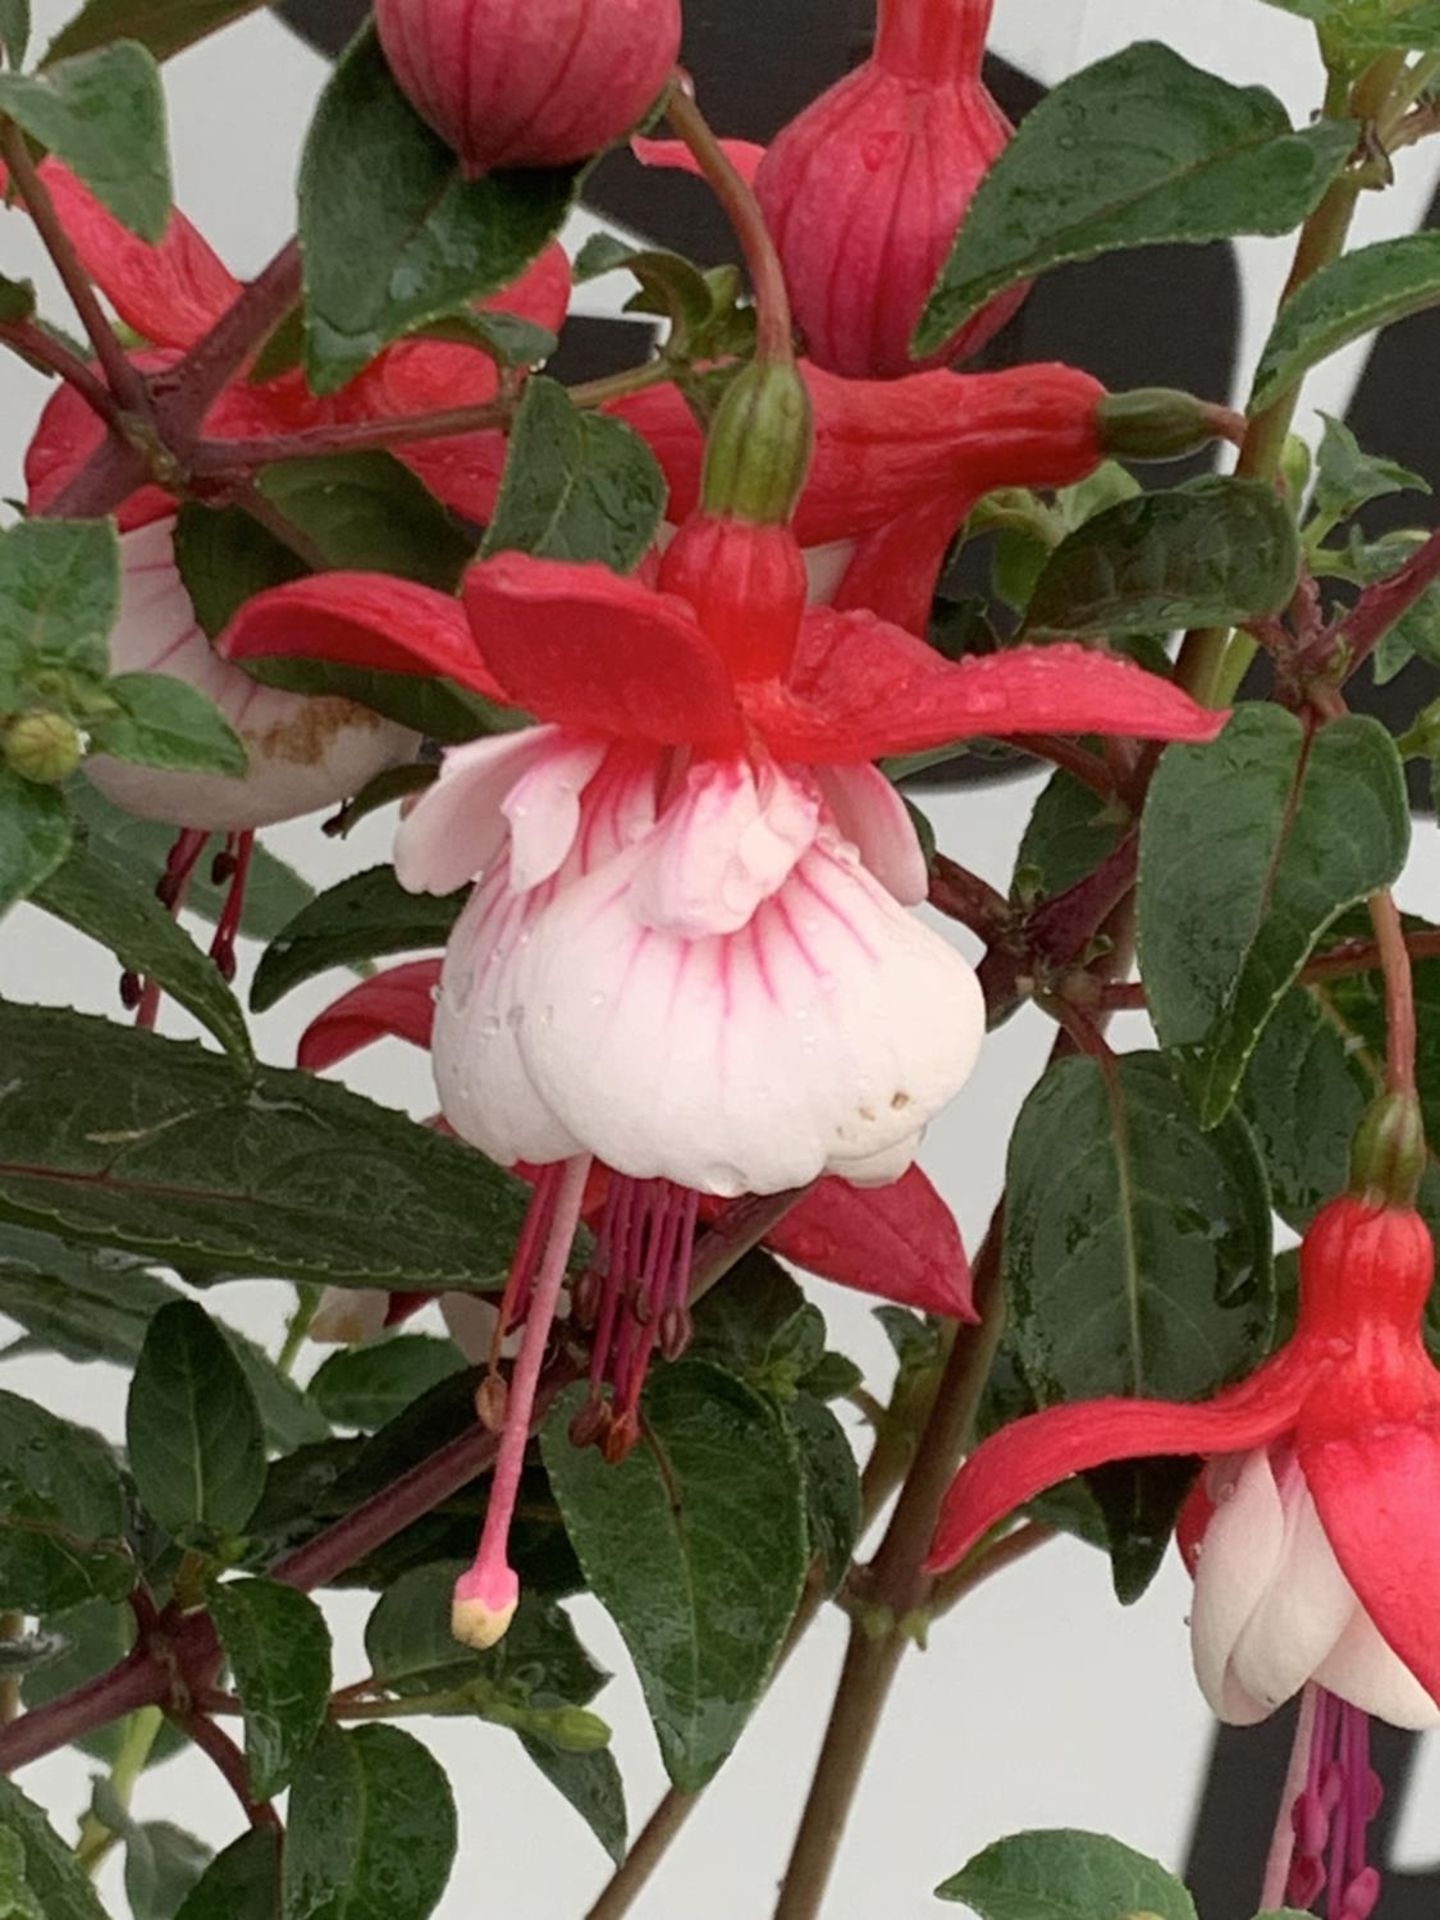 TWO BELLA STANDARD FUCHSIA IN A 3 LTR POTS 70CM -80CM TALL TO BE SOLD FOR THE TWO PLUS VAT - Image 4 of 5